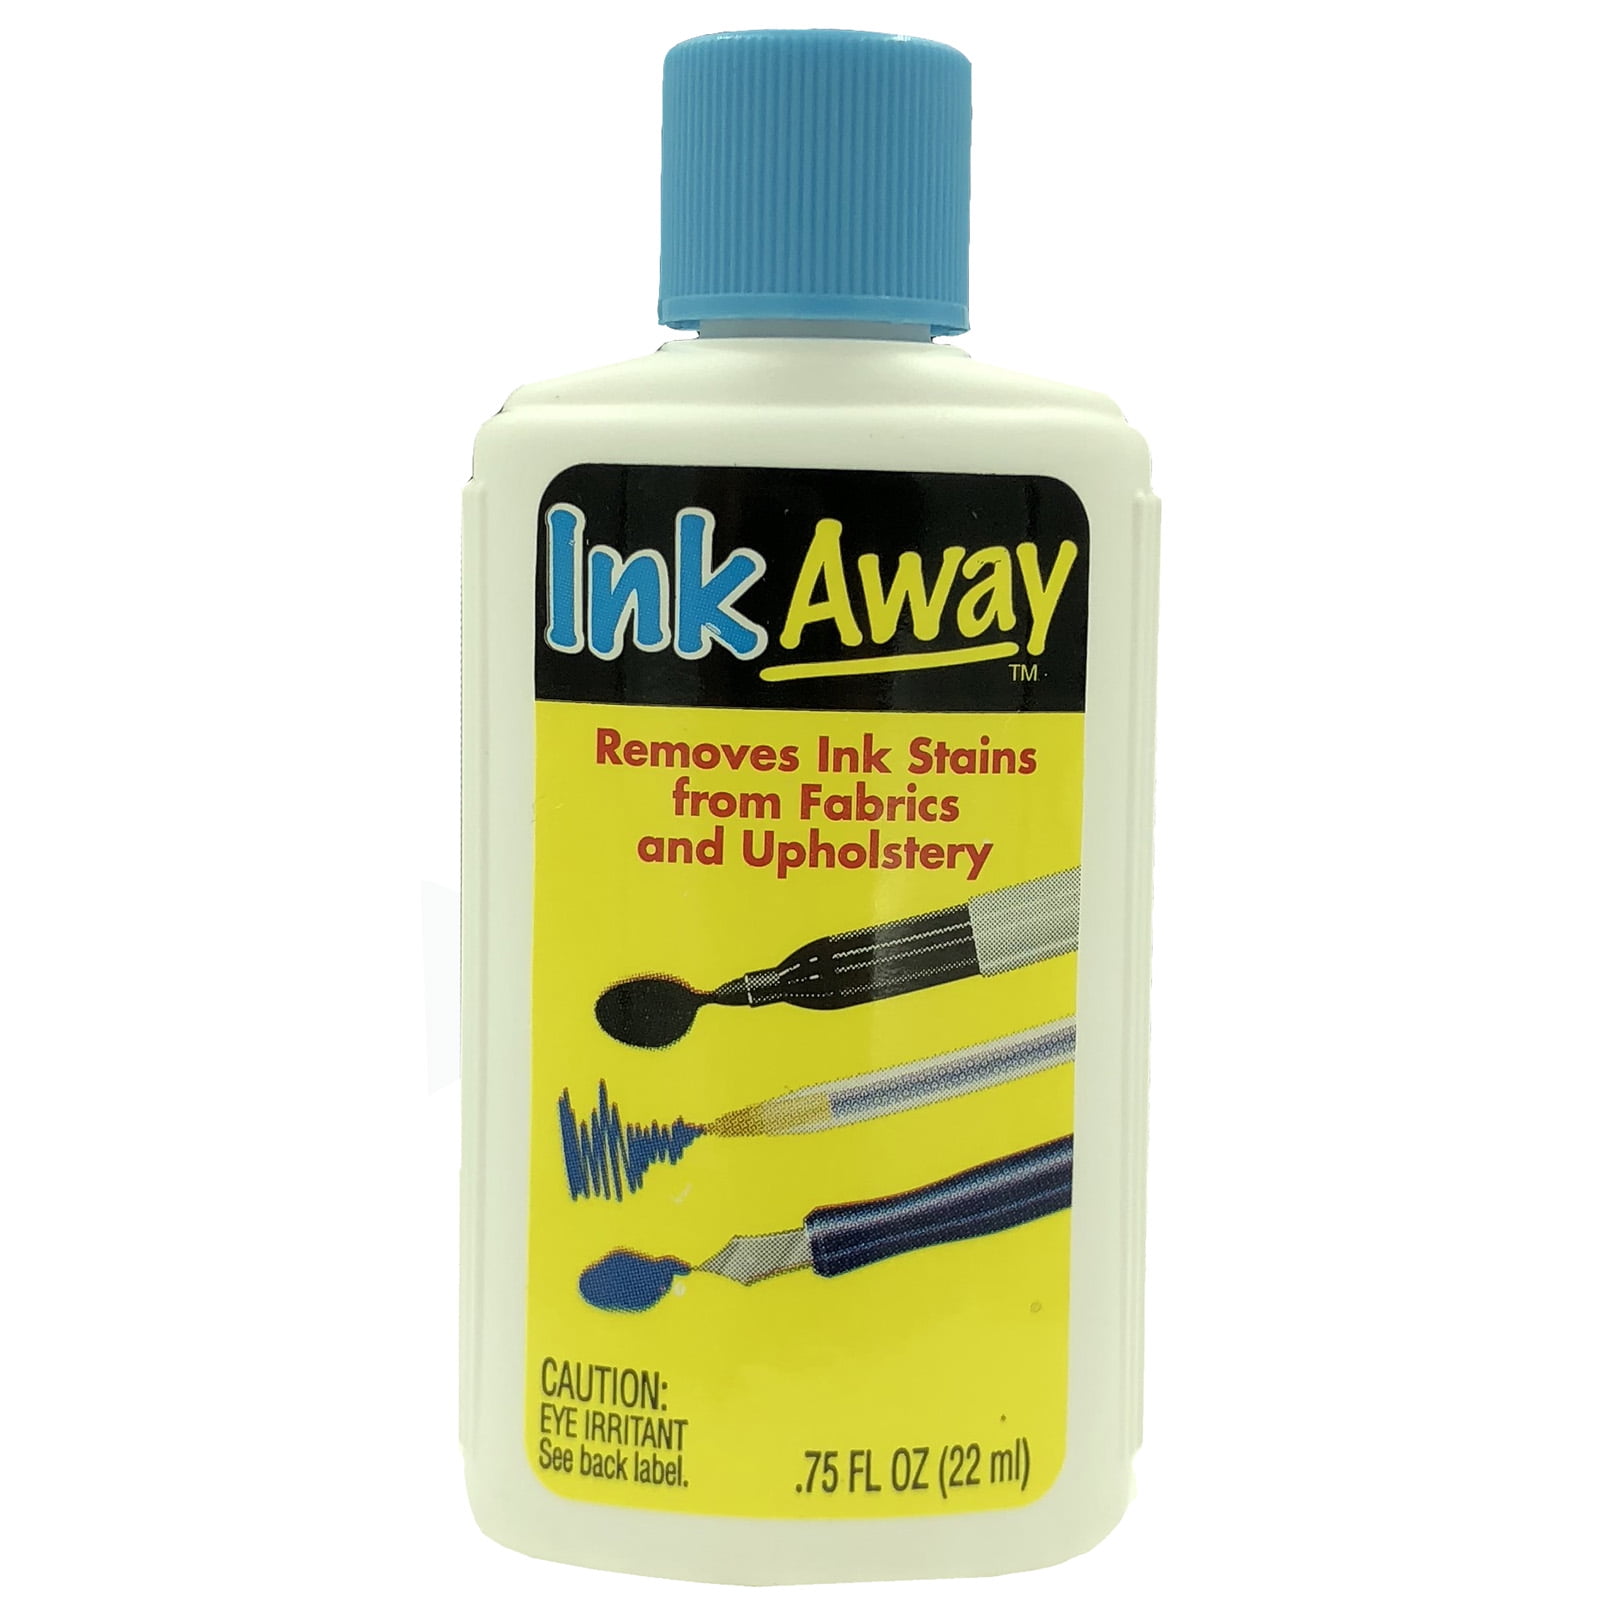 Wash•Away™ (Solvent Ink Remover)